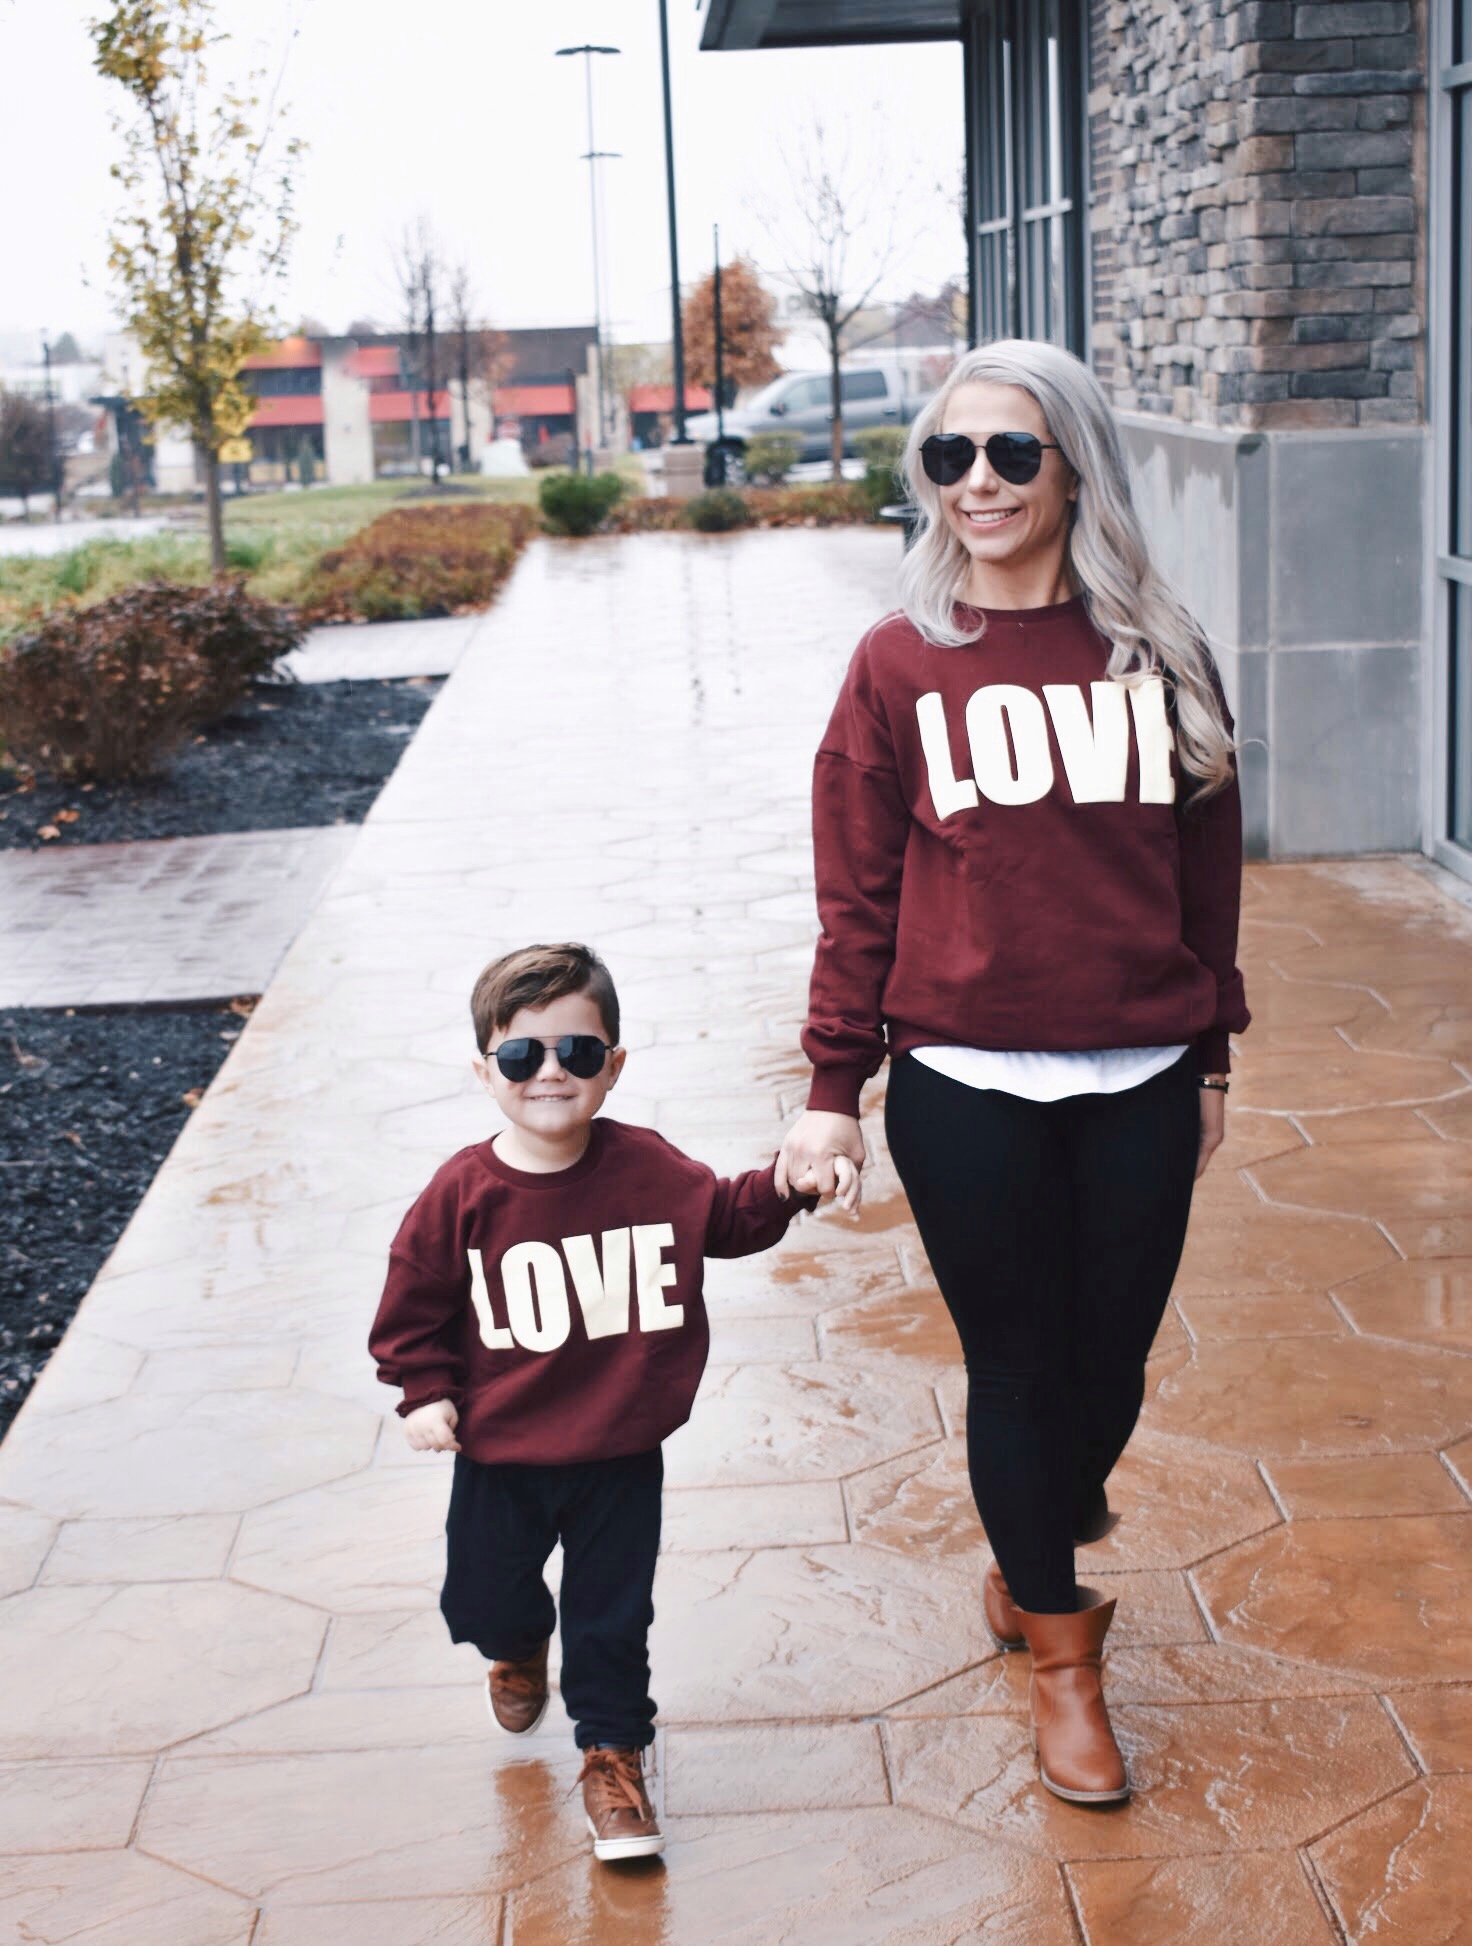 Mother Son Matching Outfits - Twinning Outfits for Boy Moms! You won't believe the cuteness! Try these cute matching outfits for mommy and son for your next adventure with your little man! Blogger Tricia Nibarger of COVET by tricia showcases stylish boy mom matching outfits with her son. Plus, an exclusive discount code to save on PatPat matching outfits! #Twinning #BoyMom #FashionBlogger #MommyandMe